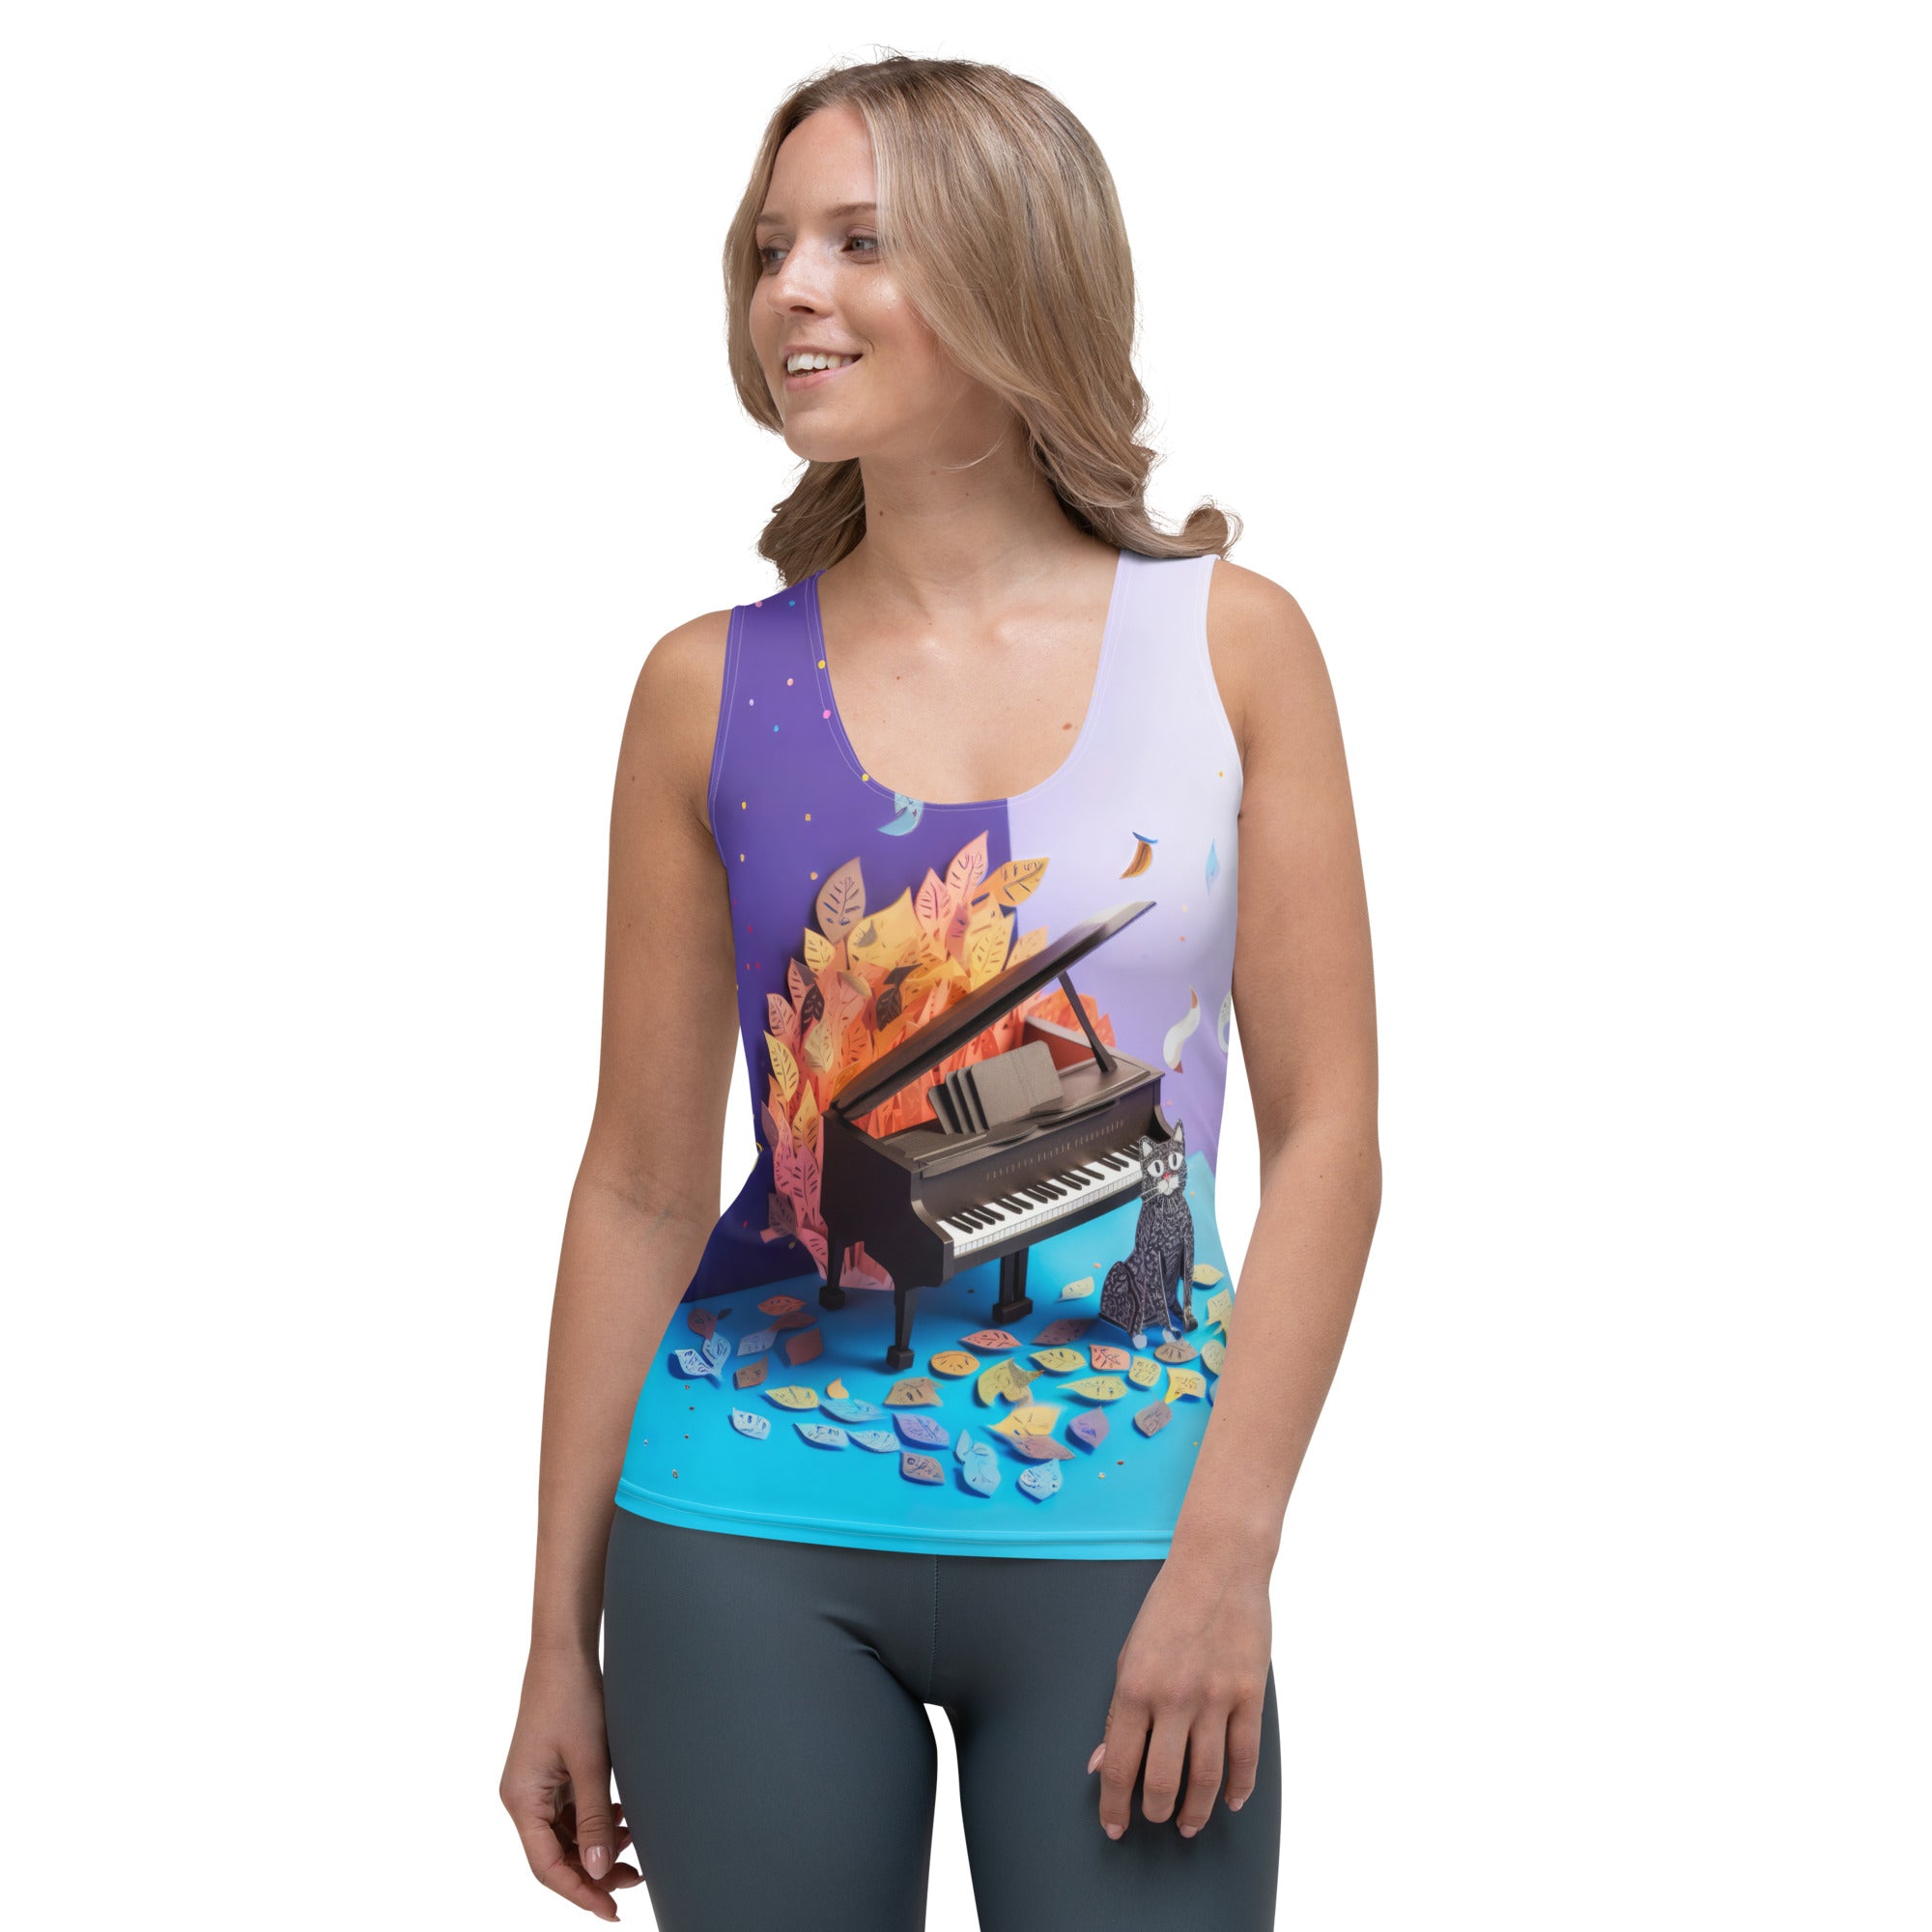 Women's Tank Top with Blossoming Cherry Papercut Design.